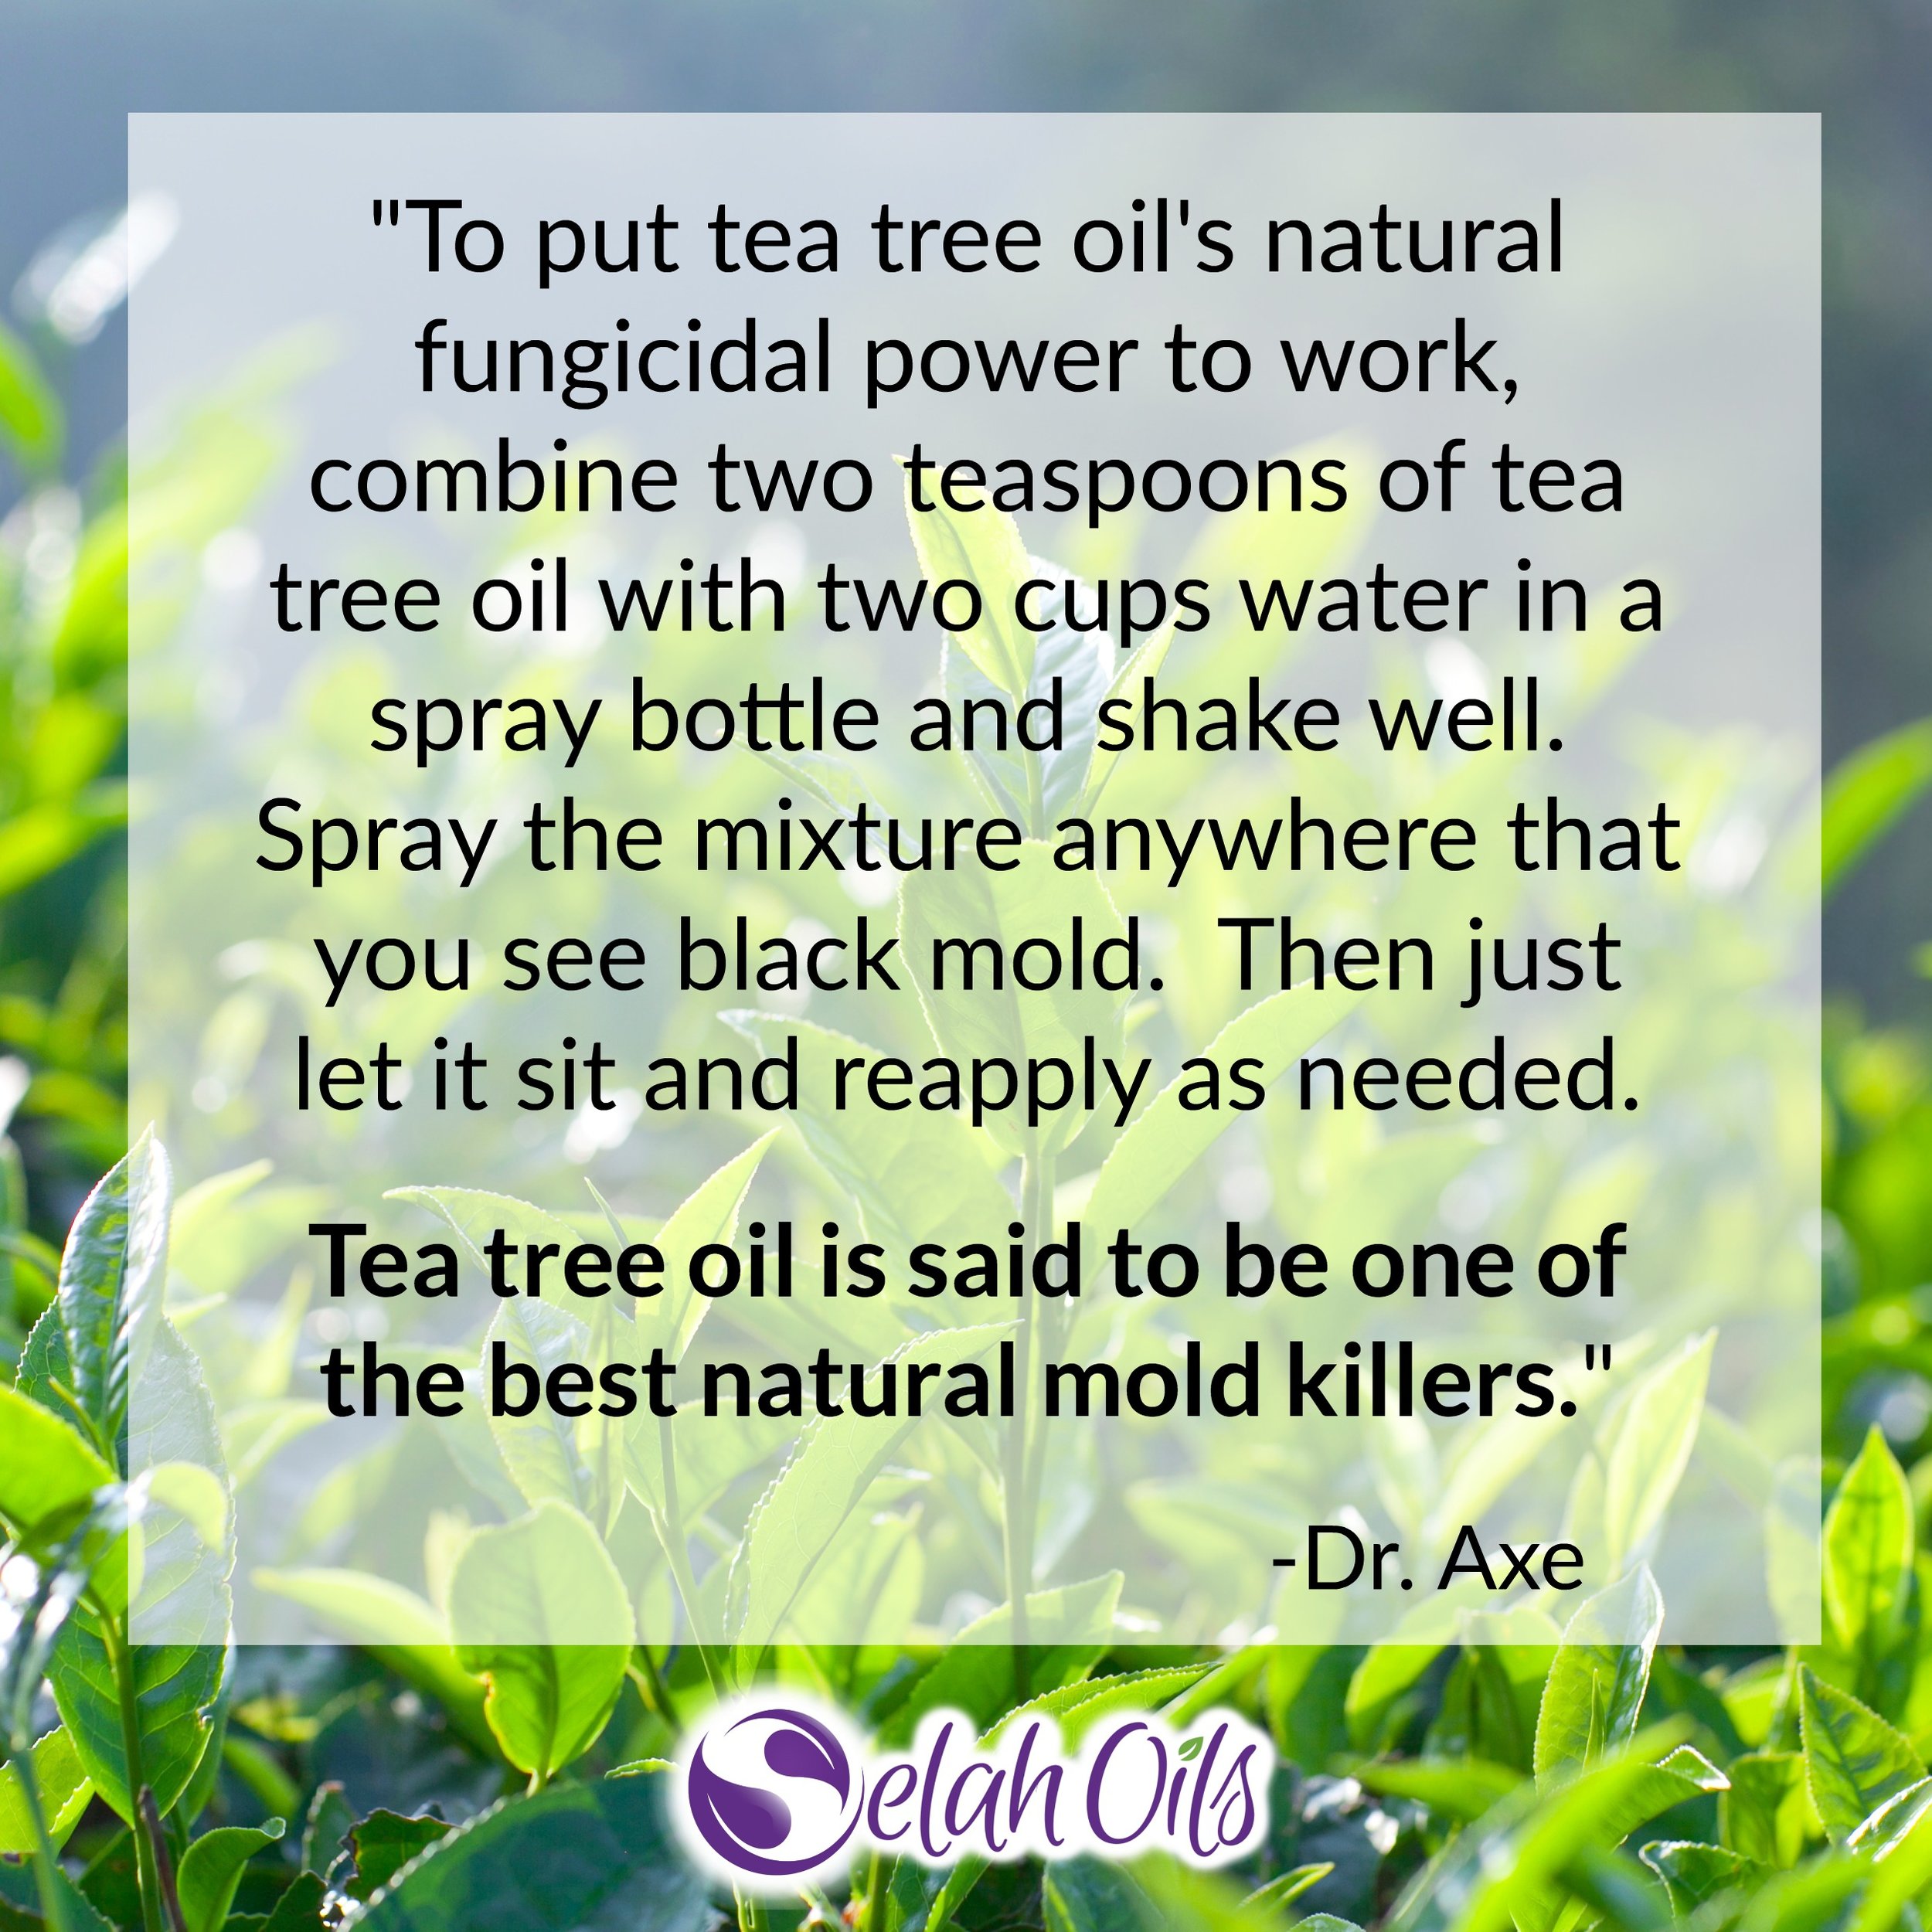 Tea Tree Oil Benefits, Uses and Potential Side Effects - Dr. Axe